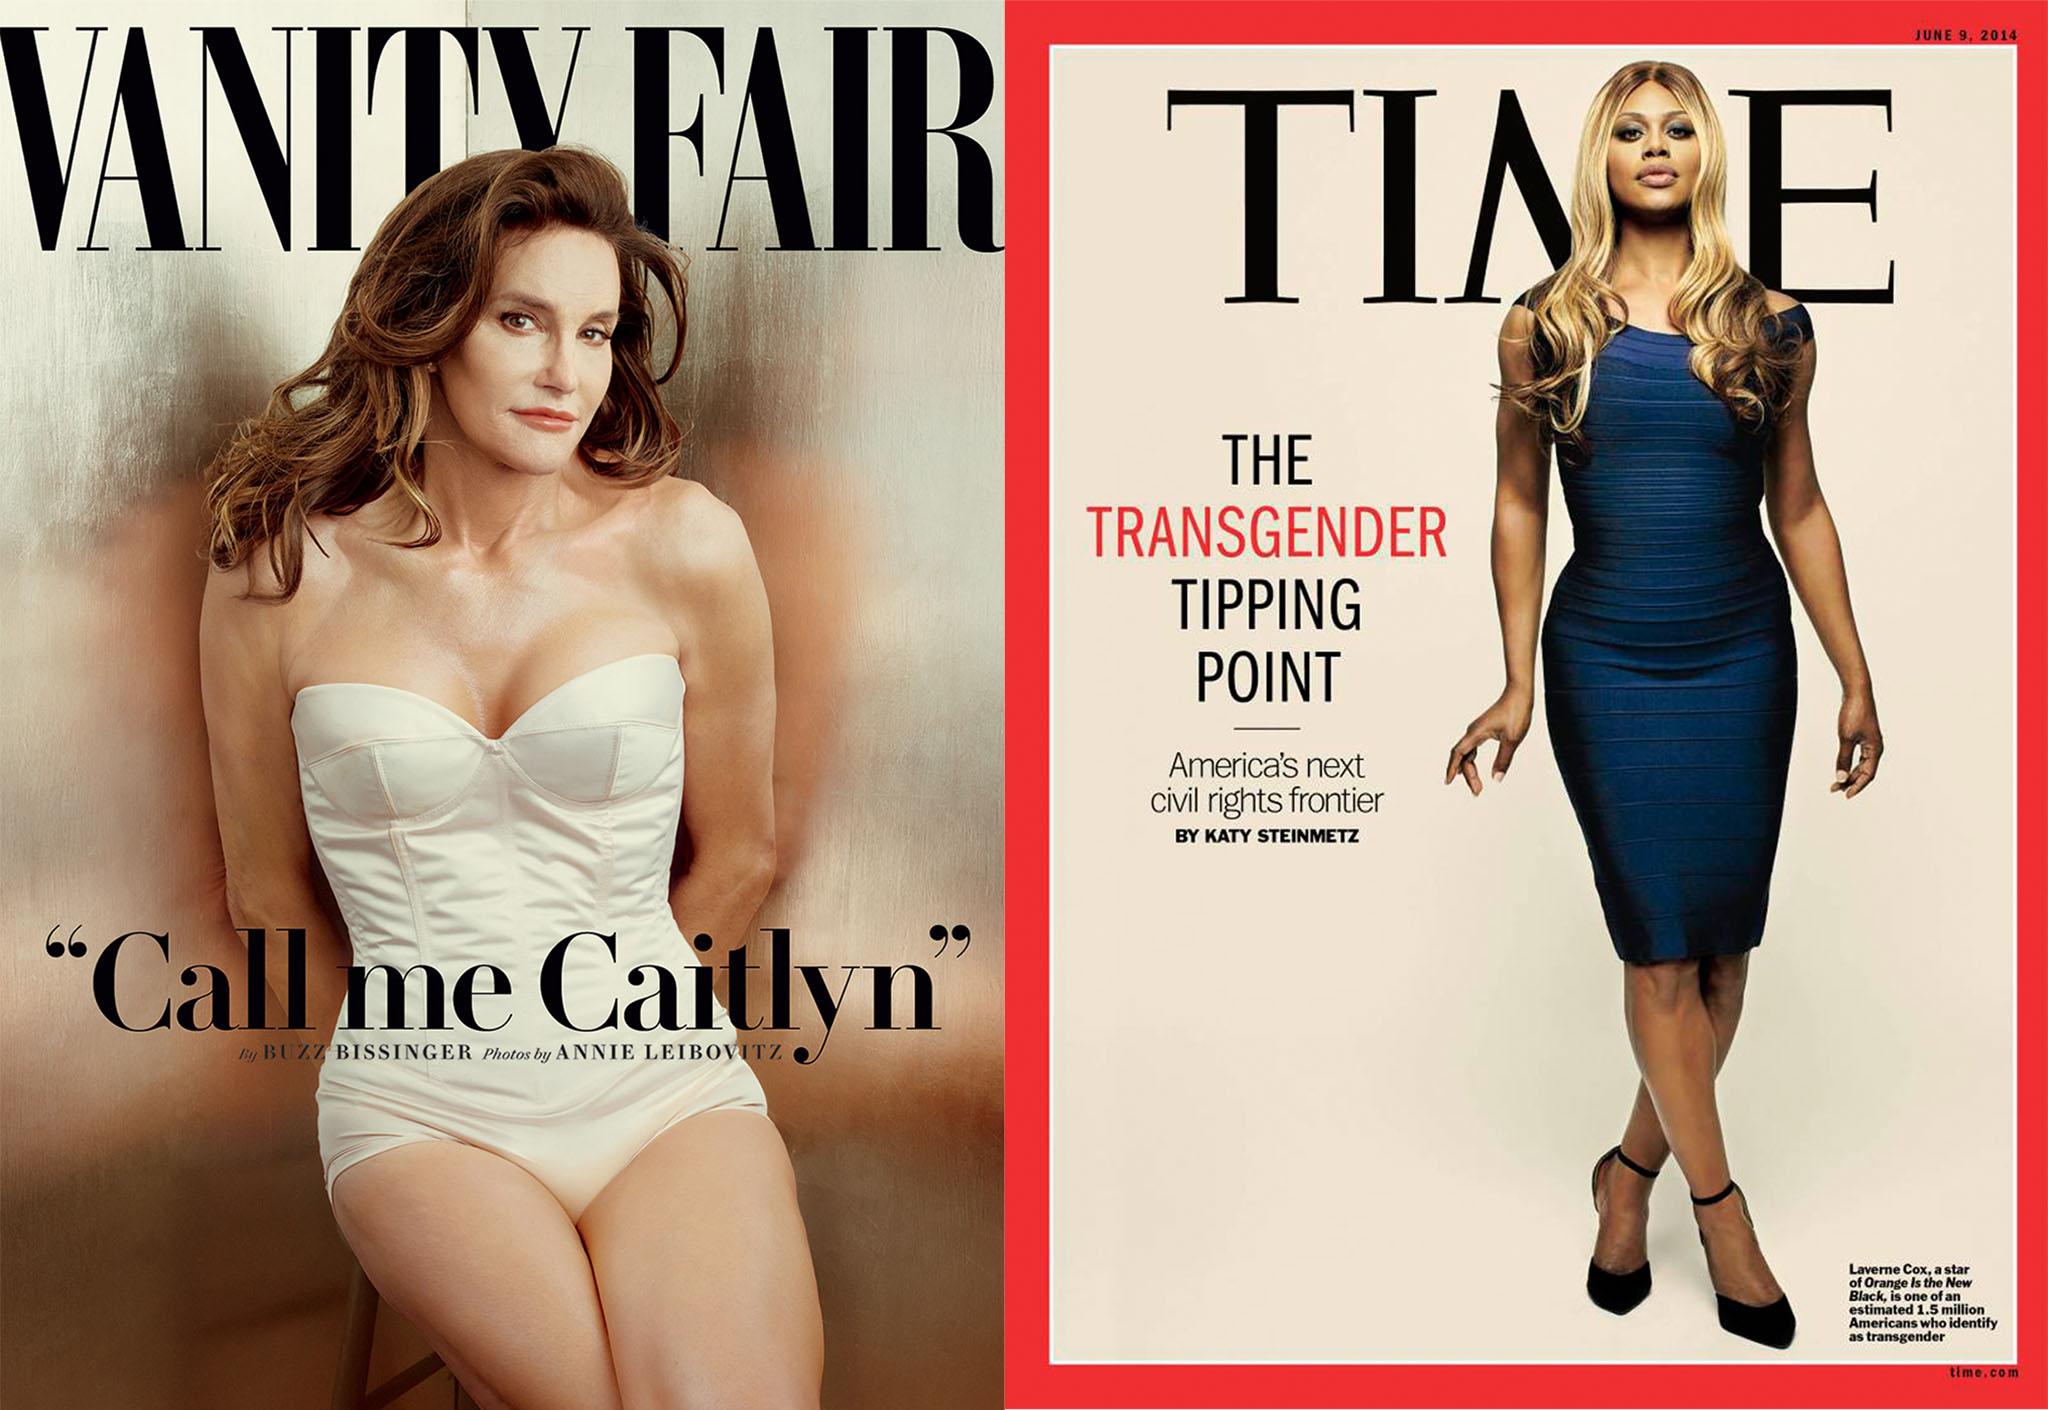 8. Caitlyn Jenner on Vanity Fair & Laverne Cox on Time (2014, 2015)